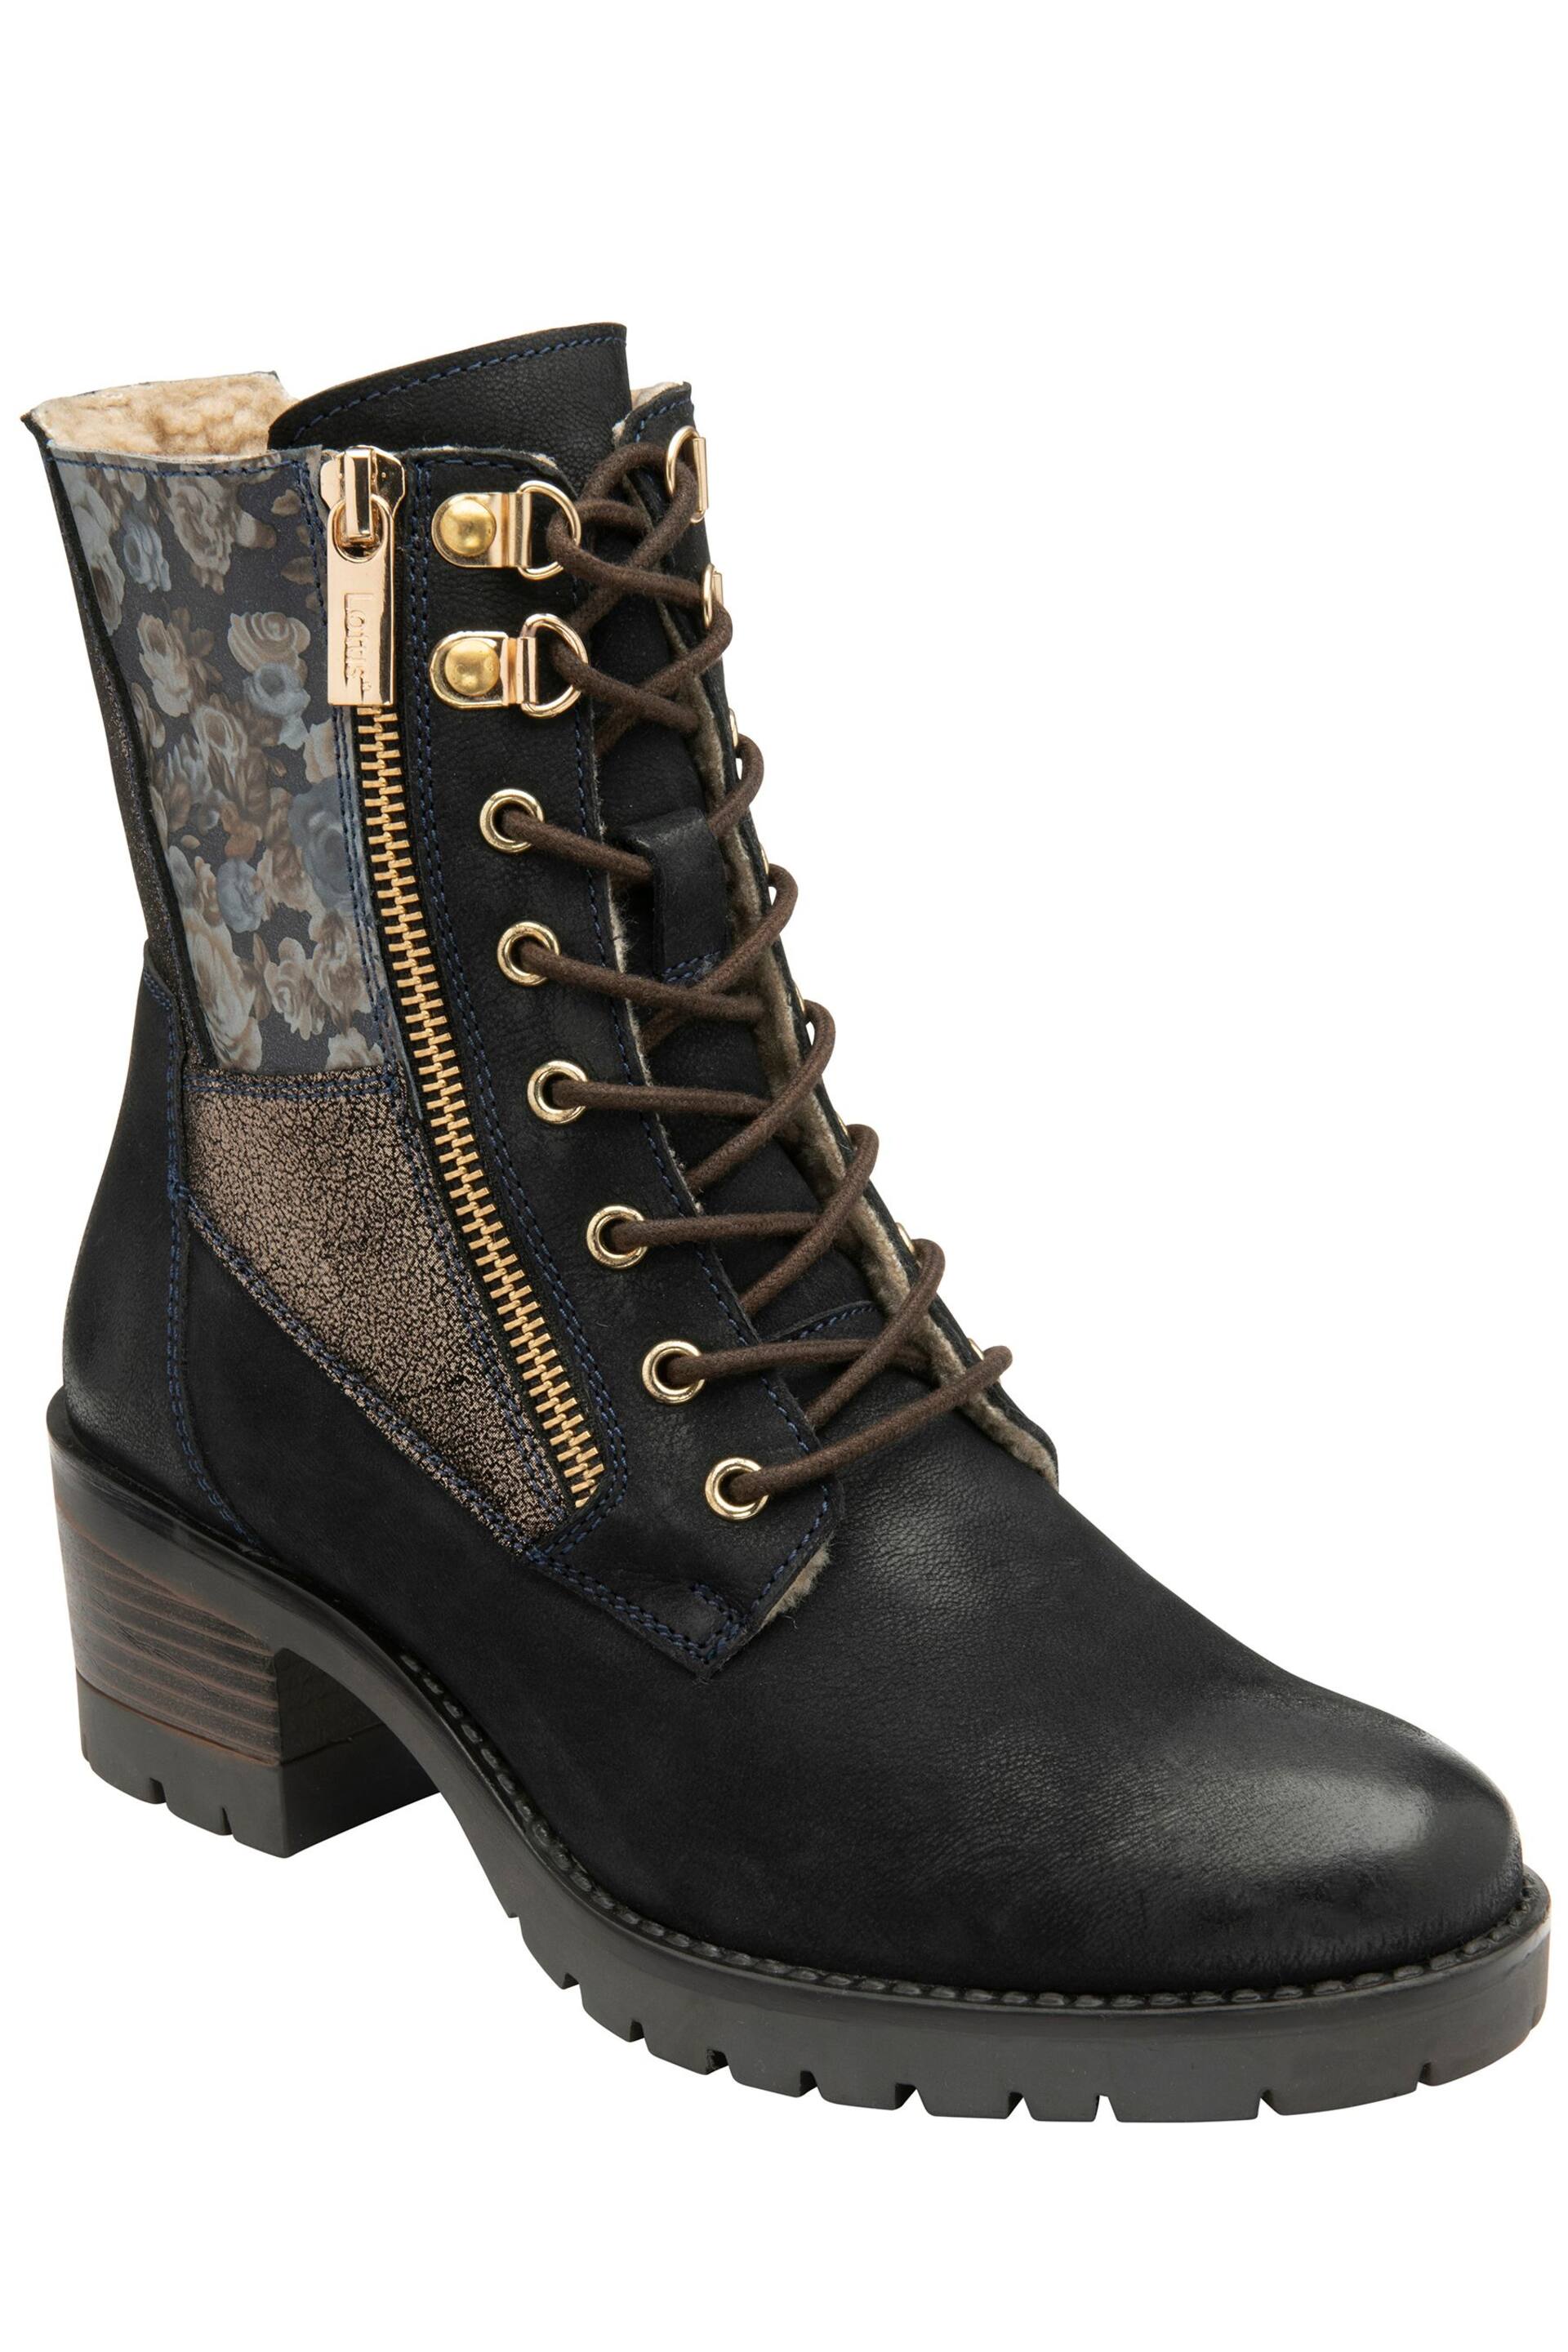 Lotus Navy Blue Leather Zip-Up Ankle Boots - Image 1 of 4